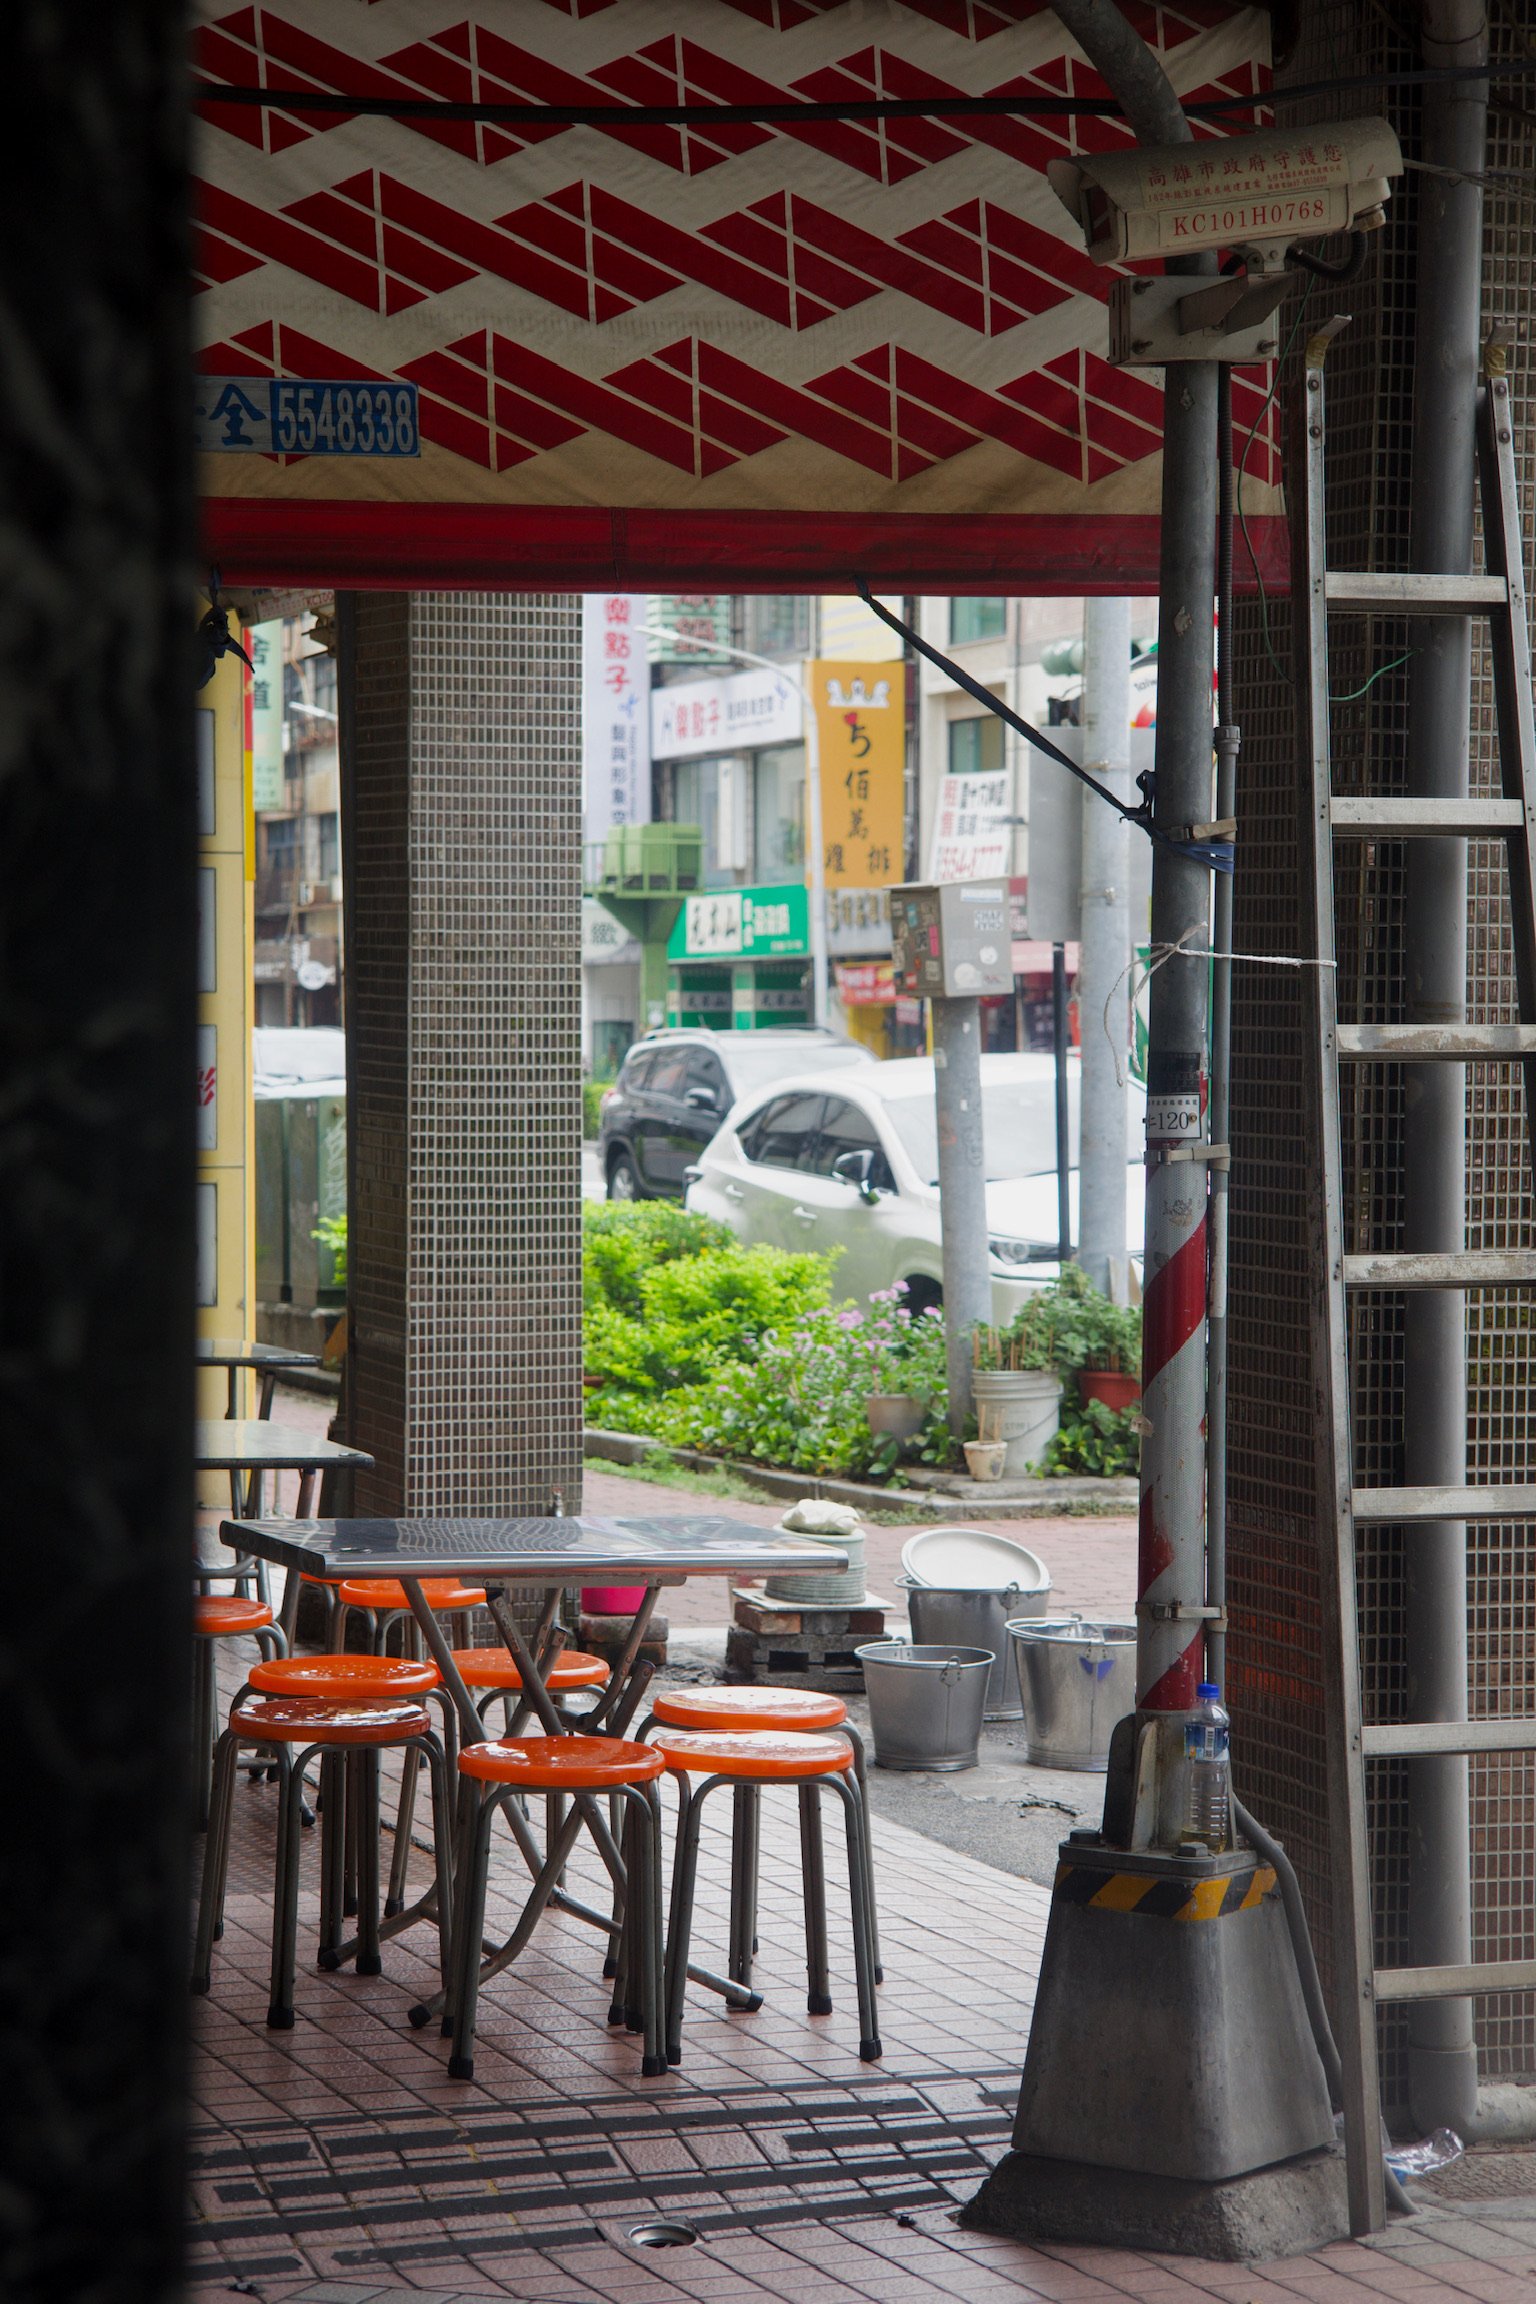 tables and chairs in bright orange under street overhang and a zigzag red and white pattern banner